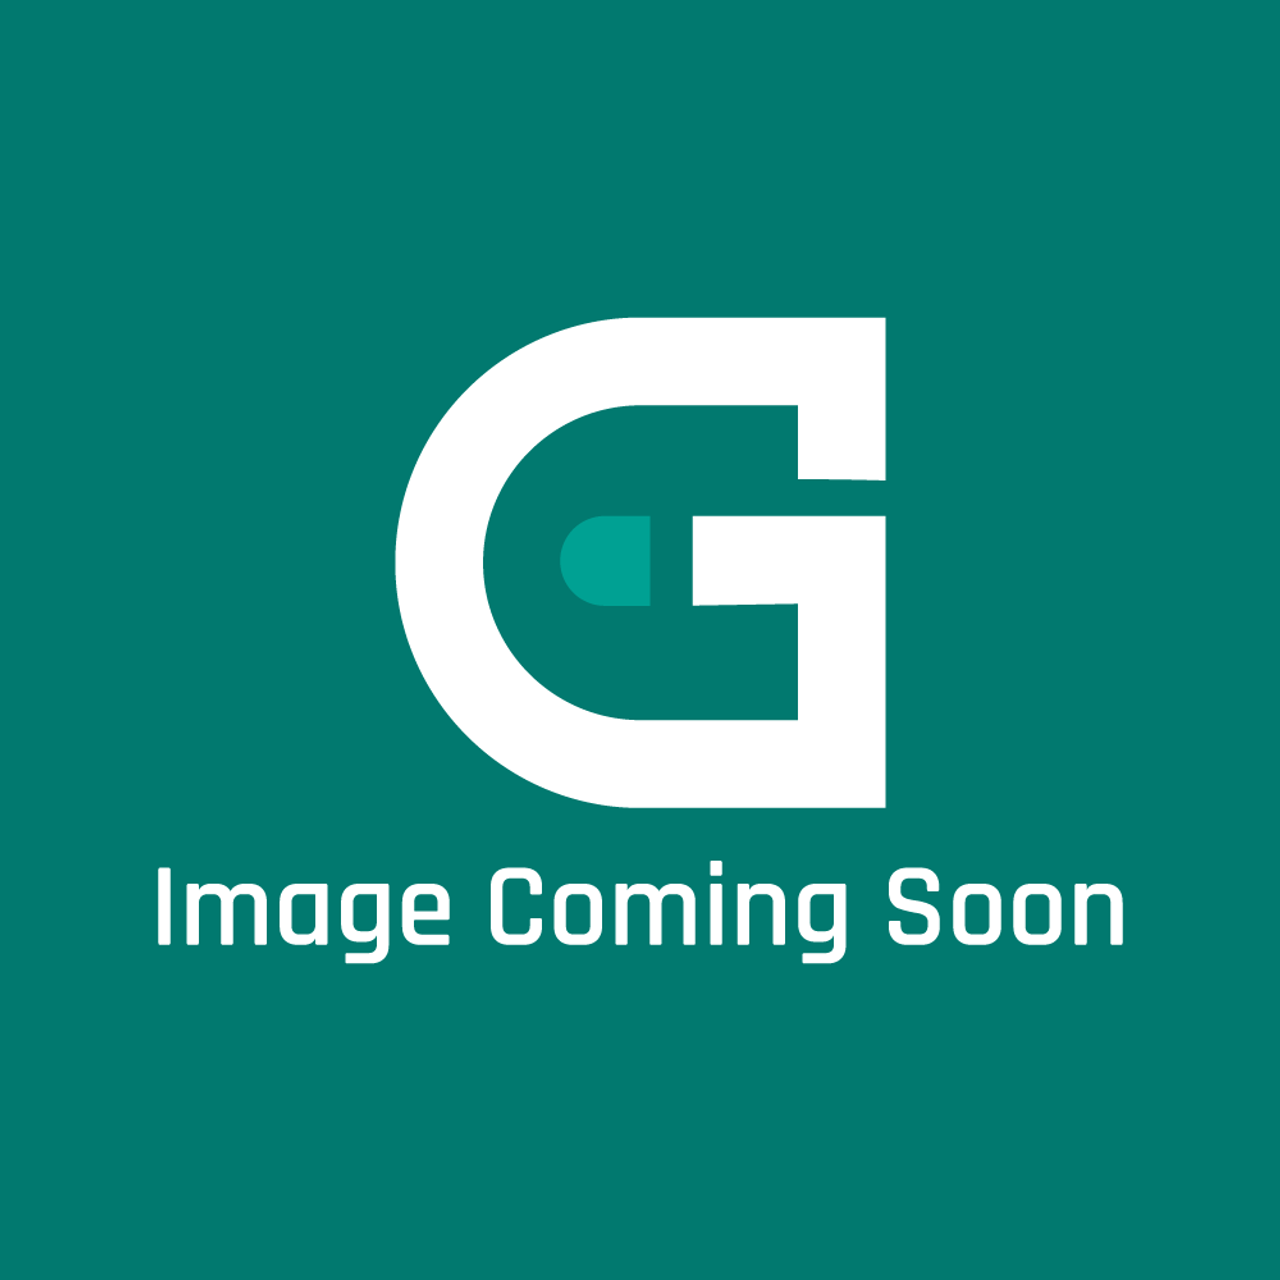 GE Appliances 14Y53 - 607308-14 Kit-Ignition Control - Image Coming Soon!